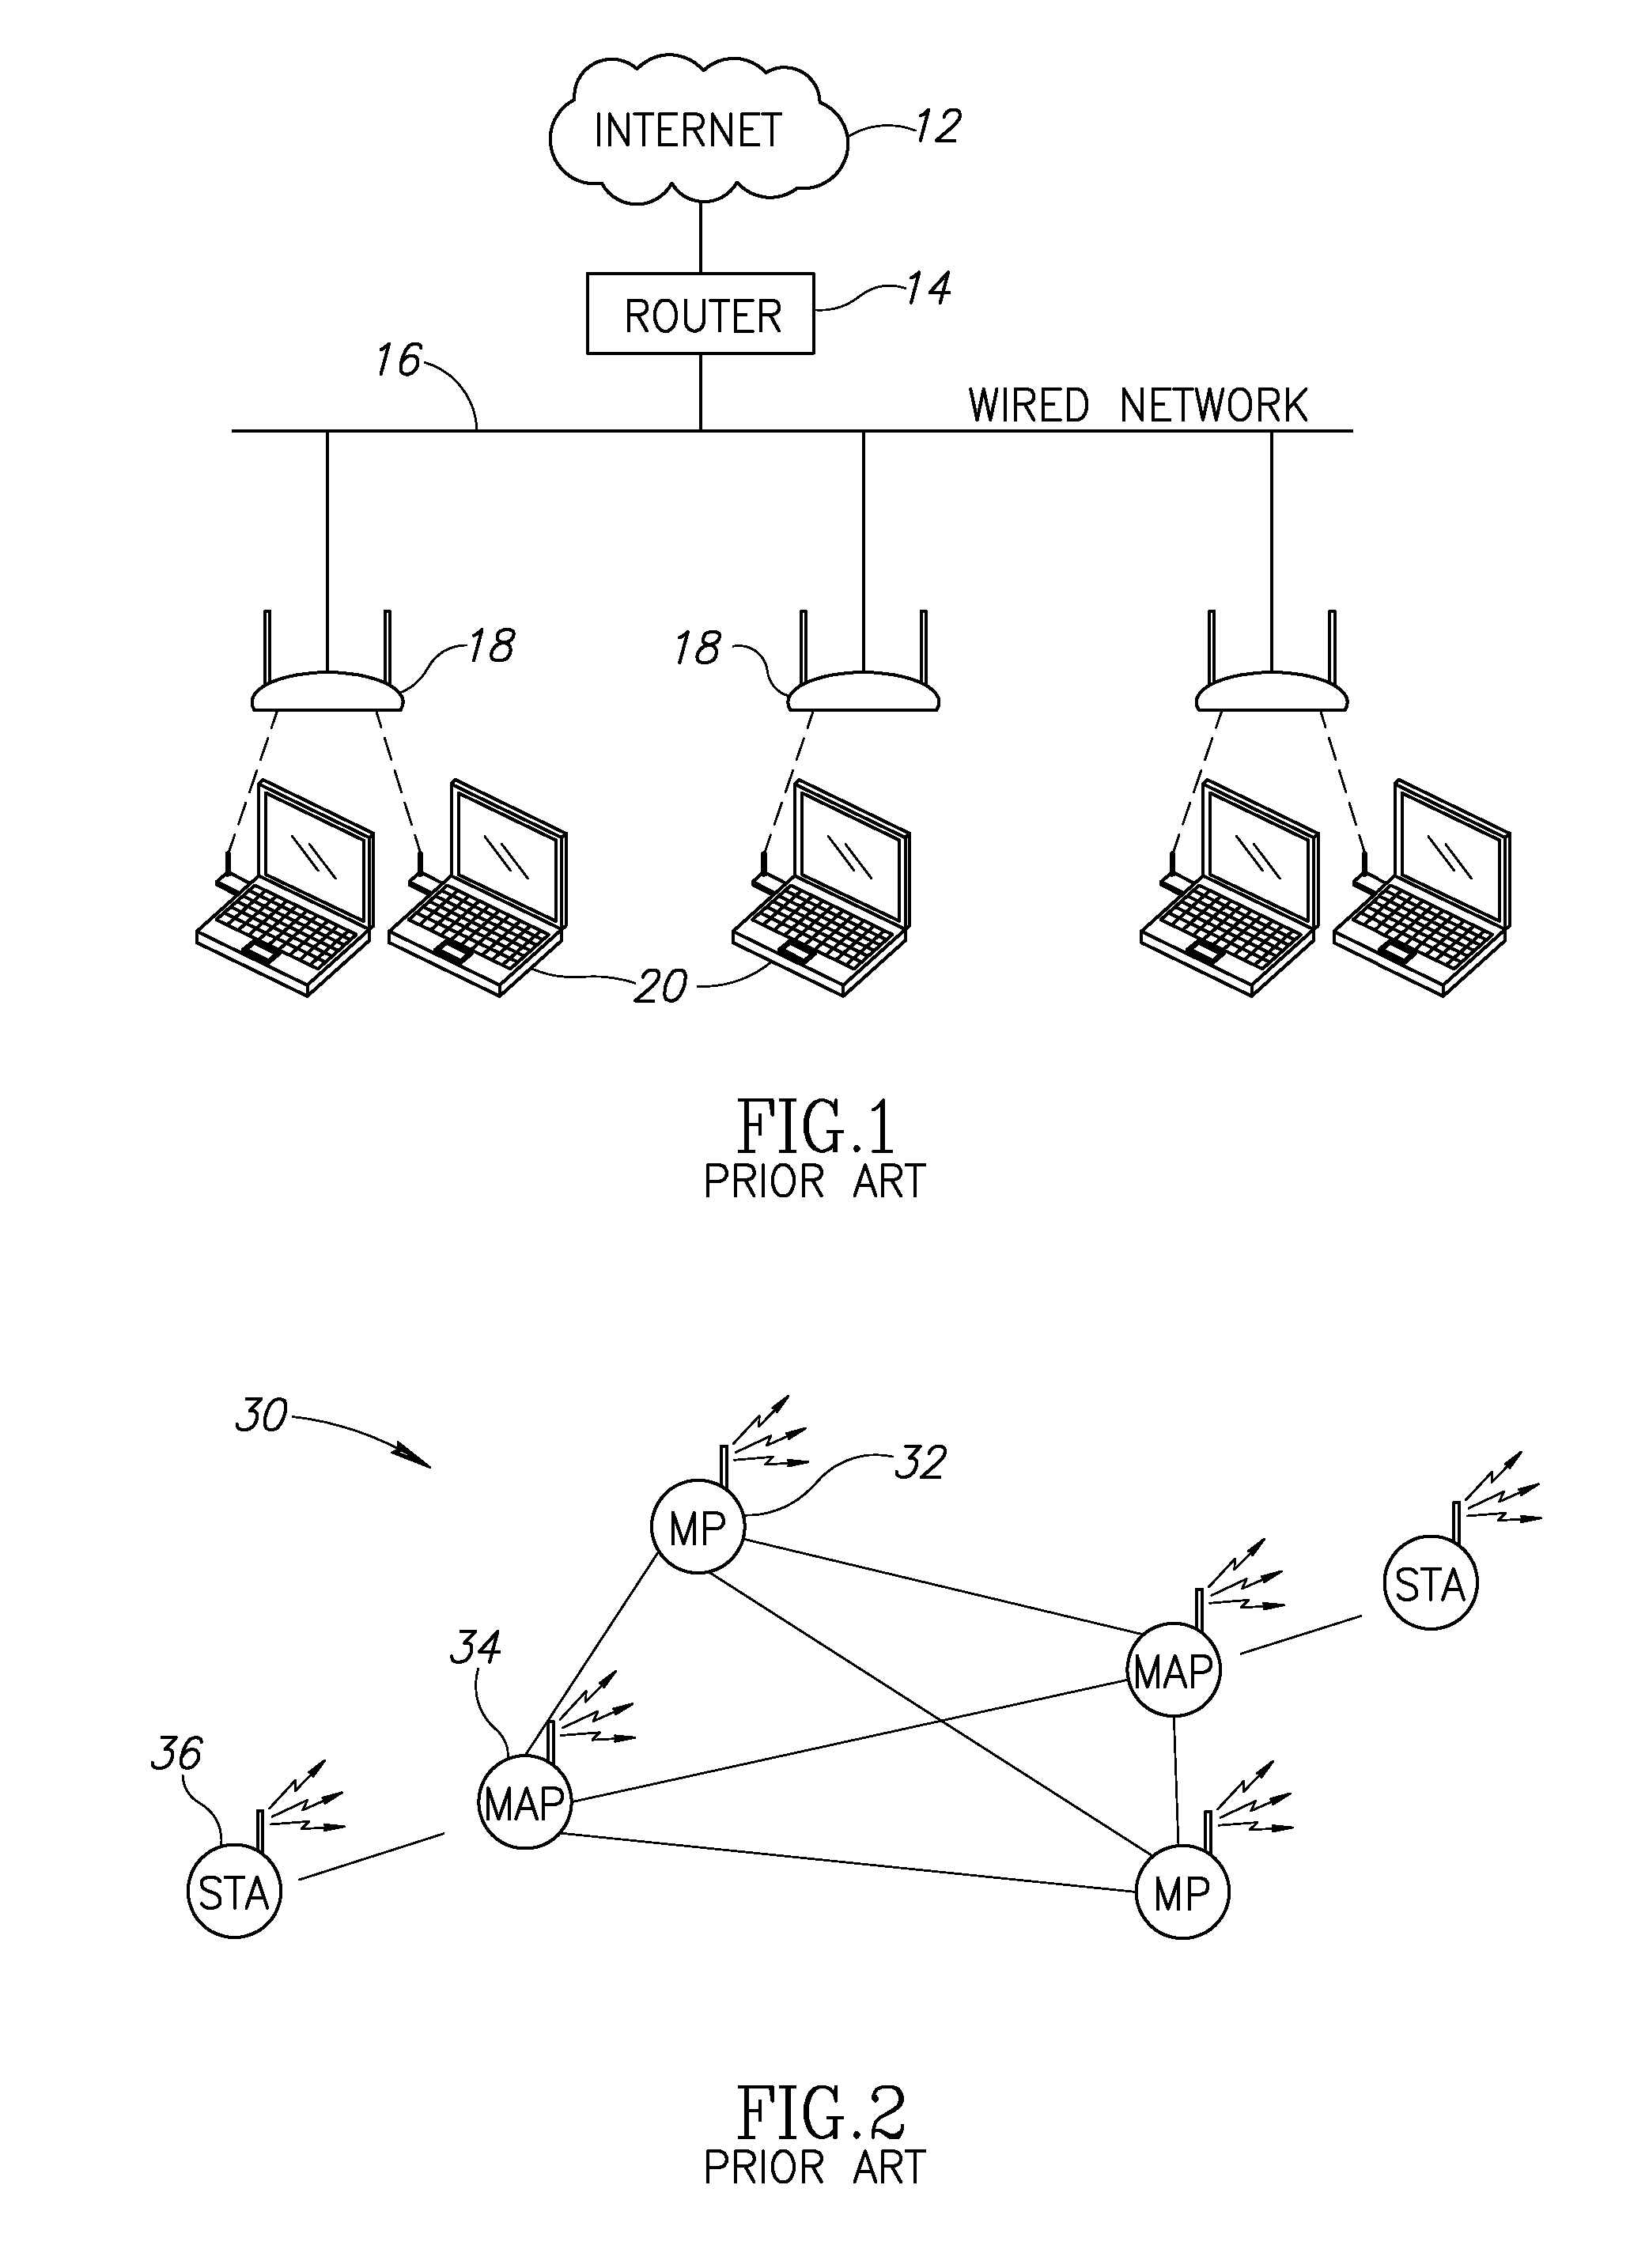 Apparatus for and method of synchronization and beaconing in a WLAN mesh network